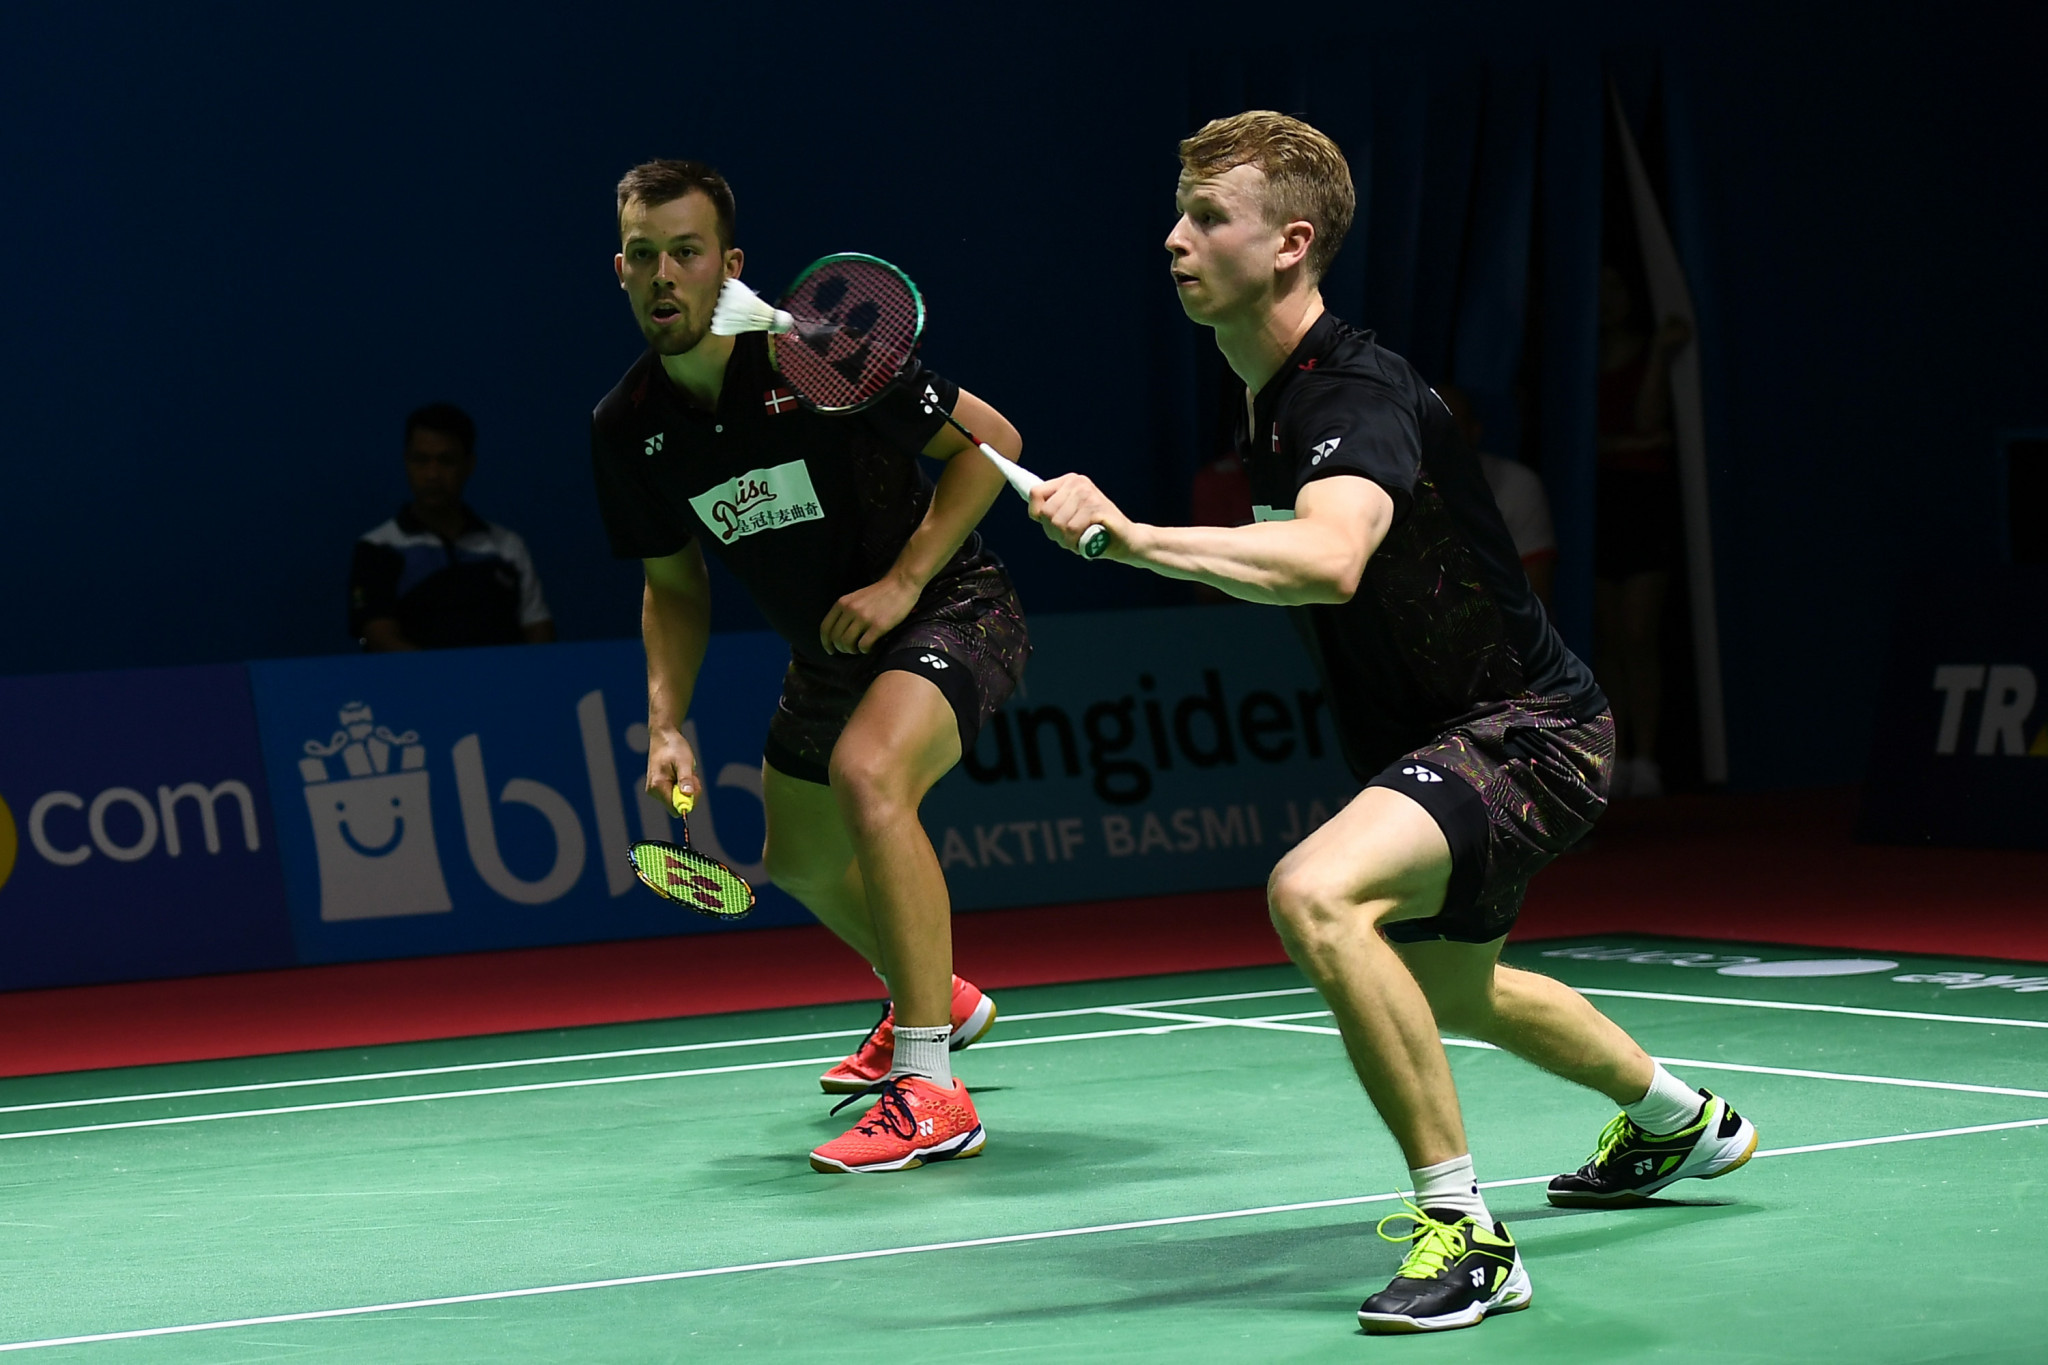 Top seeds Astrup and Rasmussen victorious on opening day of Spain Masters